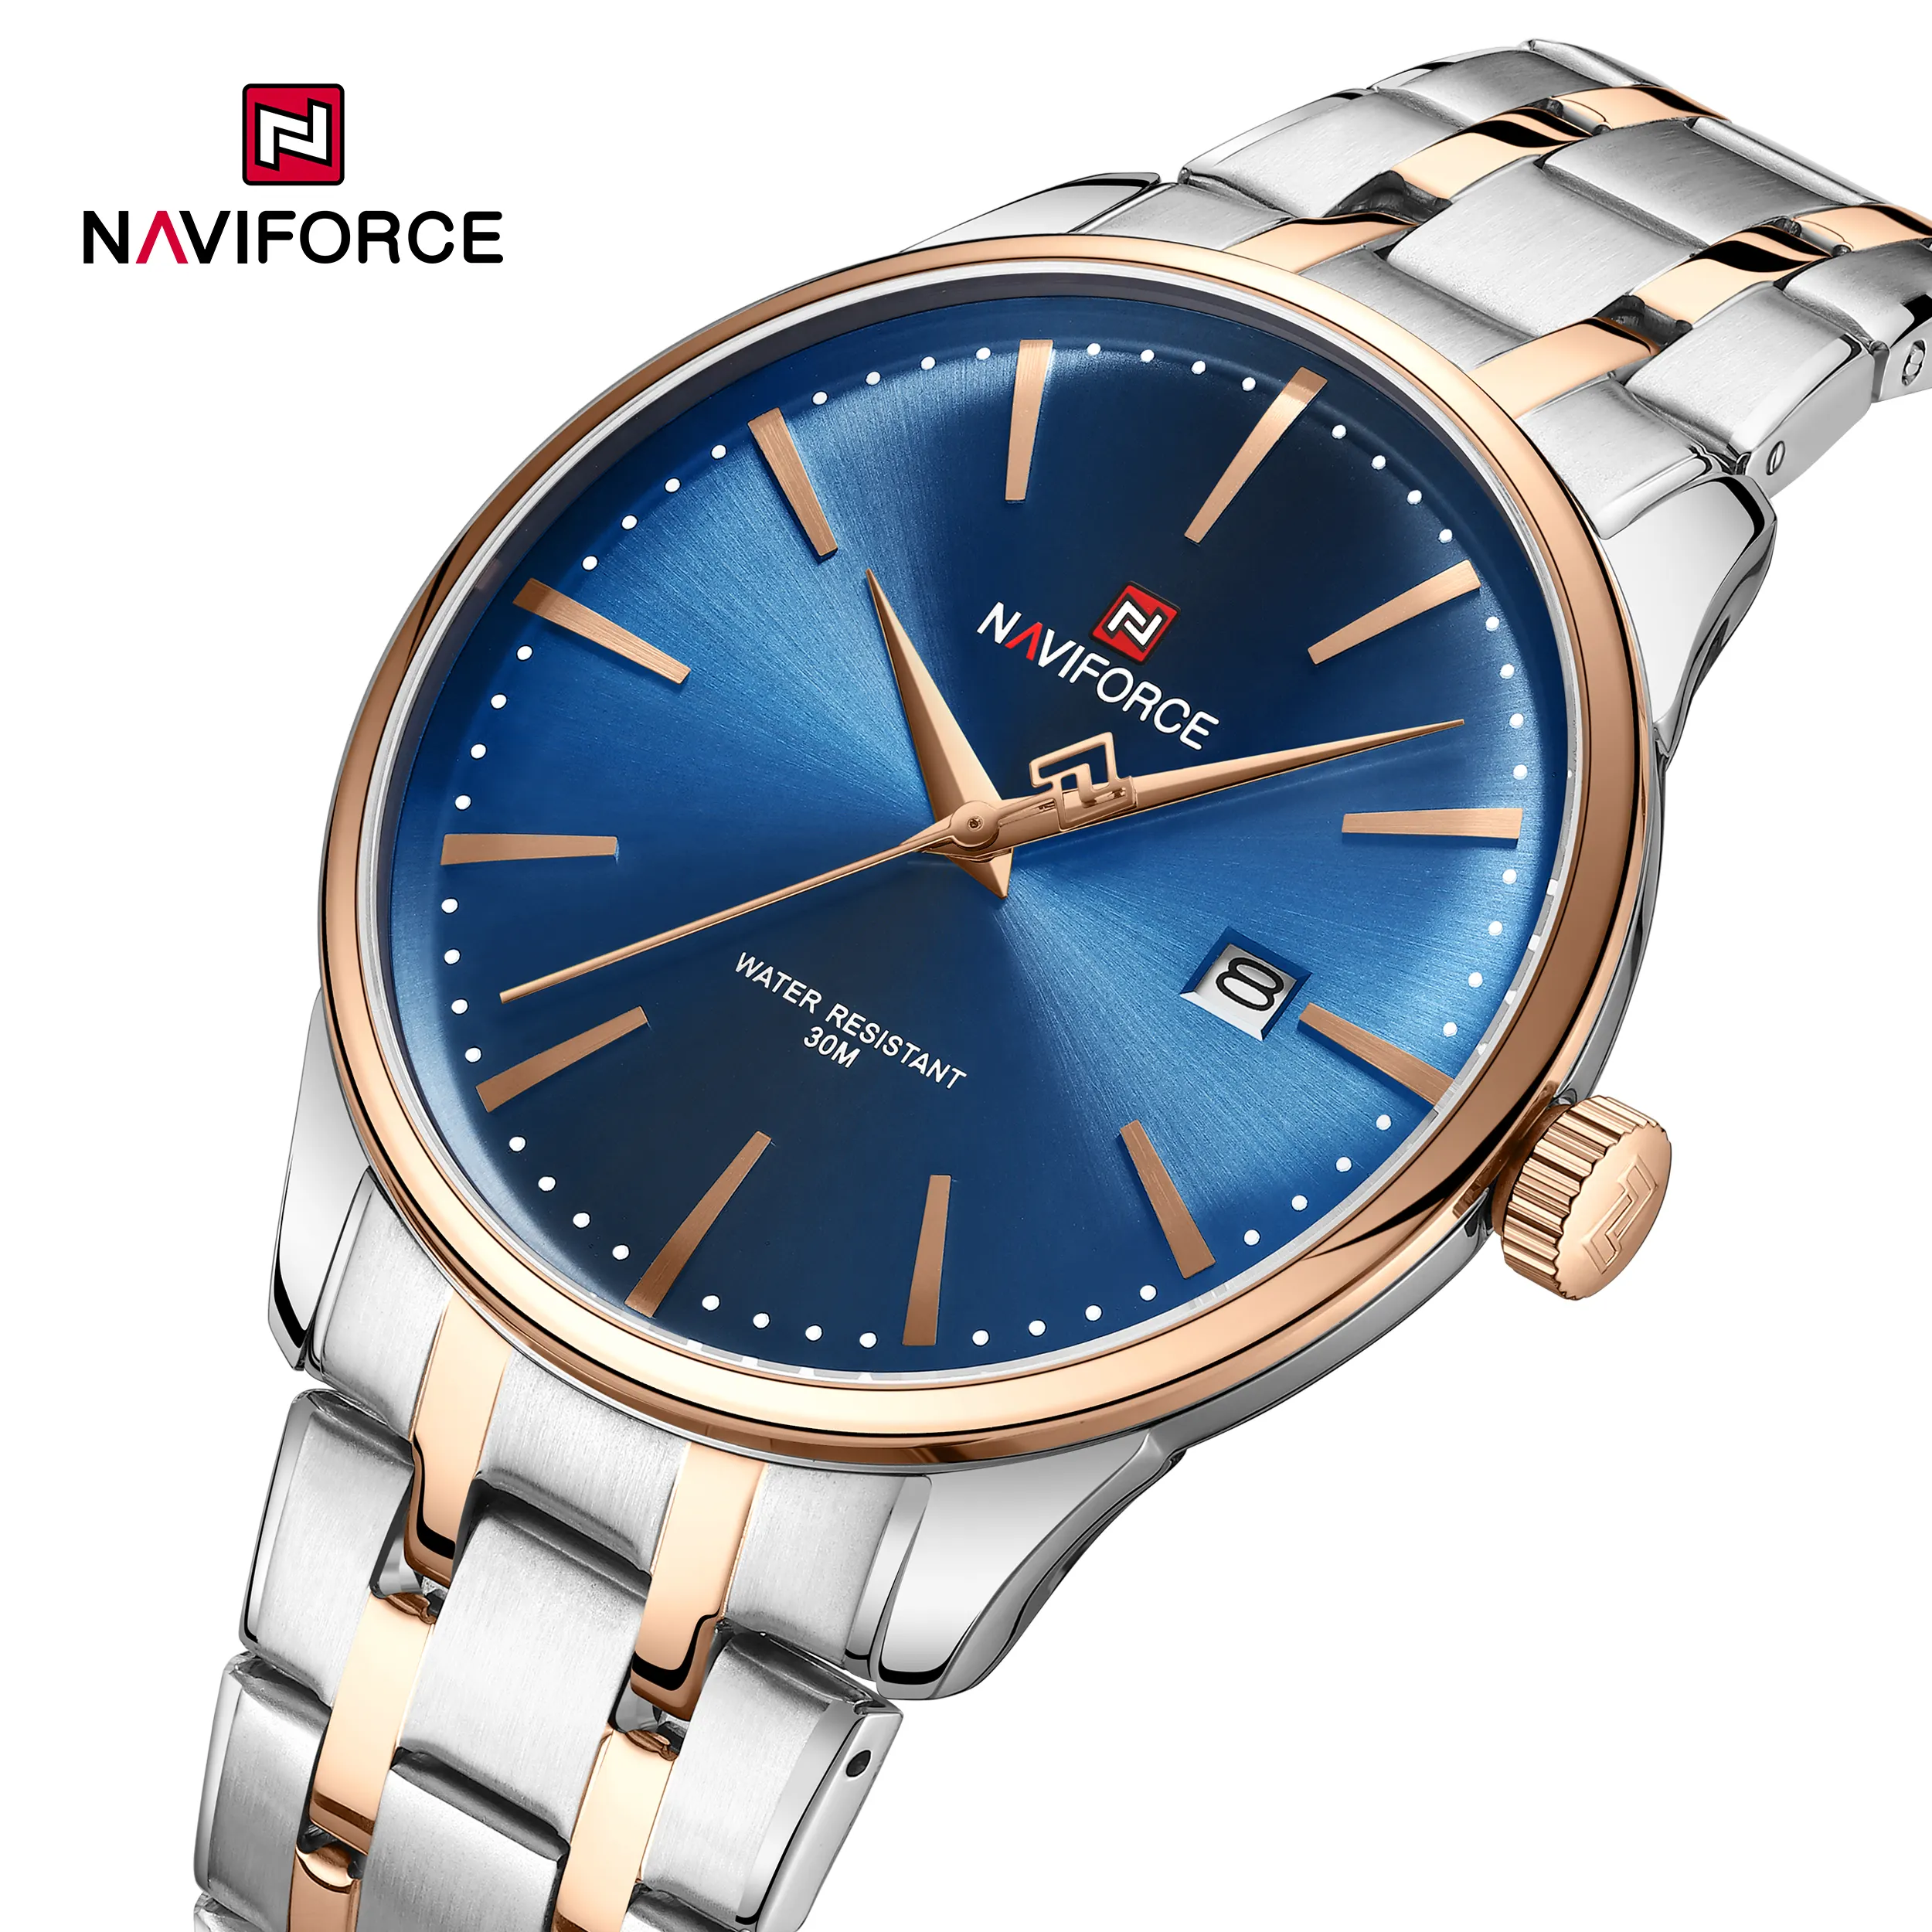 Naviforce NF9230 new design shenzhen male timepiece low cost Stainless steel band waterproofing date display Leisure wrist watch